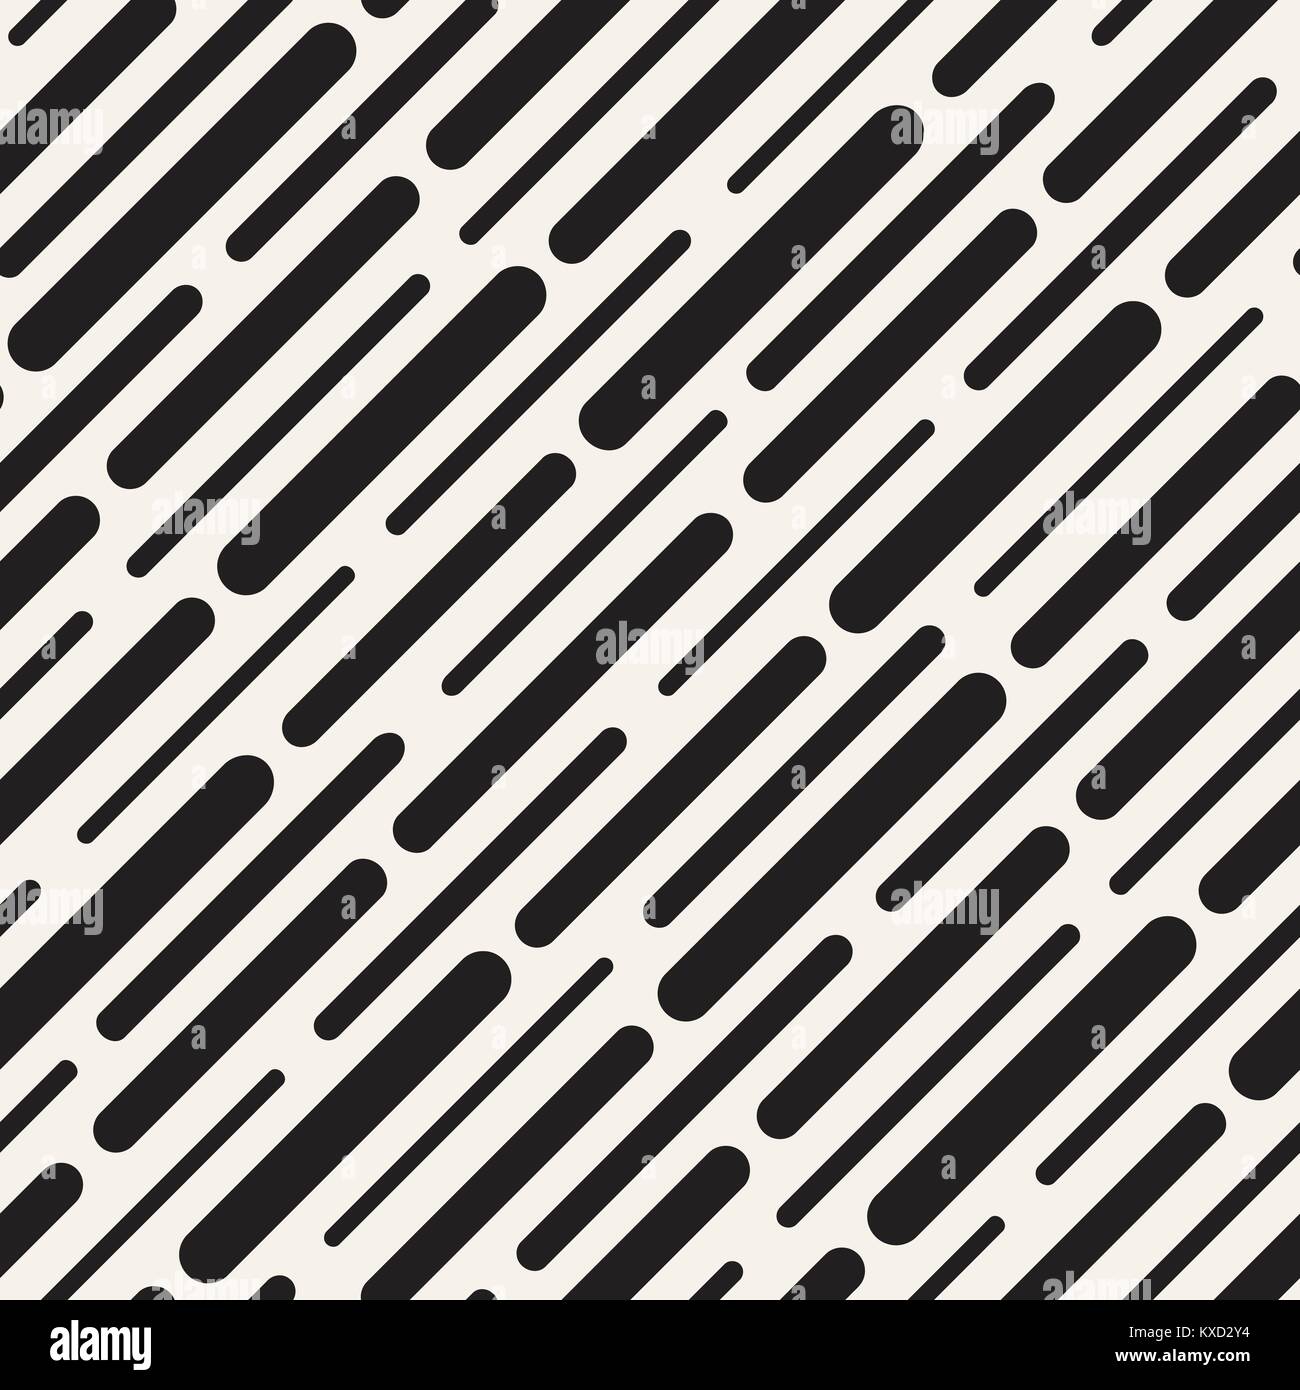 Black and White Irregular Rounded Dashed Lines Pattern. Modern Abstract ...